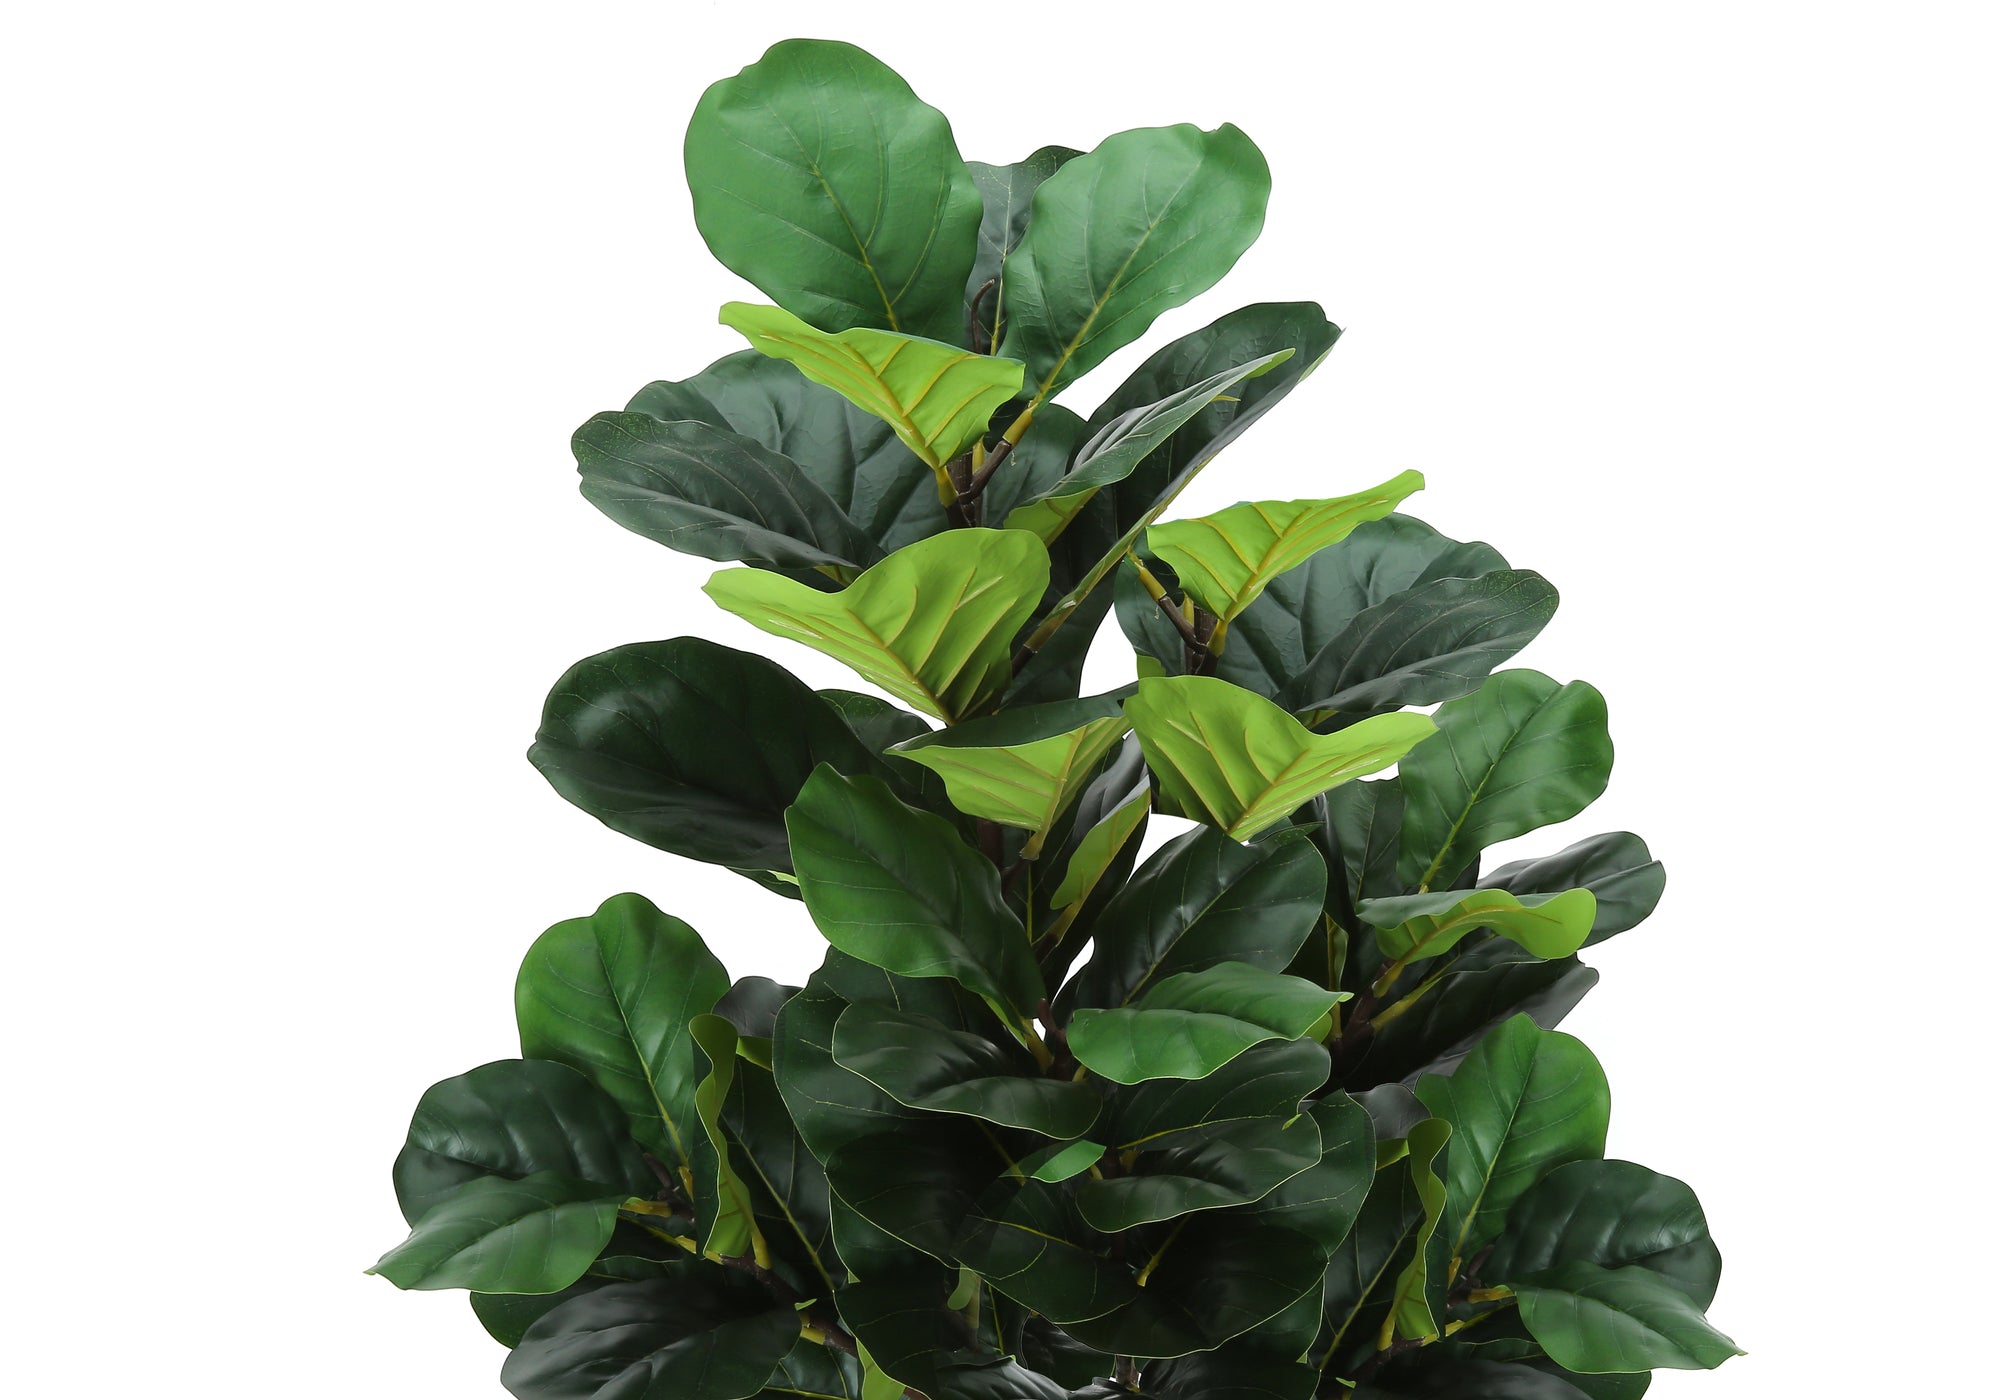 MN-369515    Artificial Plant, 47" Tall, Fiddle Tree, Indoor, Faux, Fake, Floor, Greenery, Potted, Real Touch, Decorative, Green Leaves, Black Pot